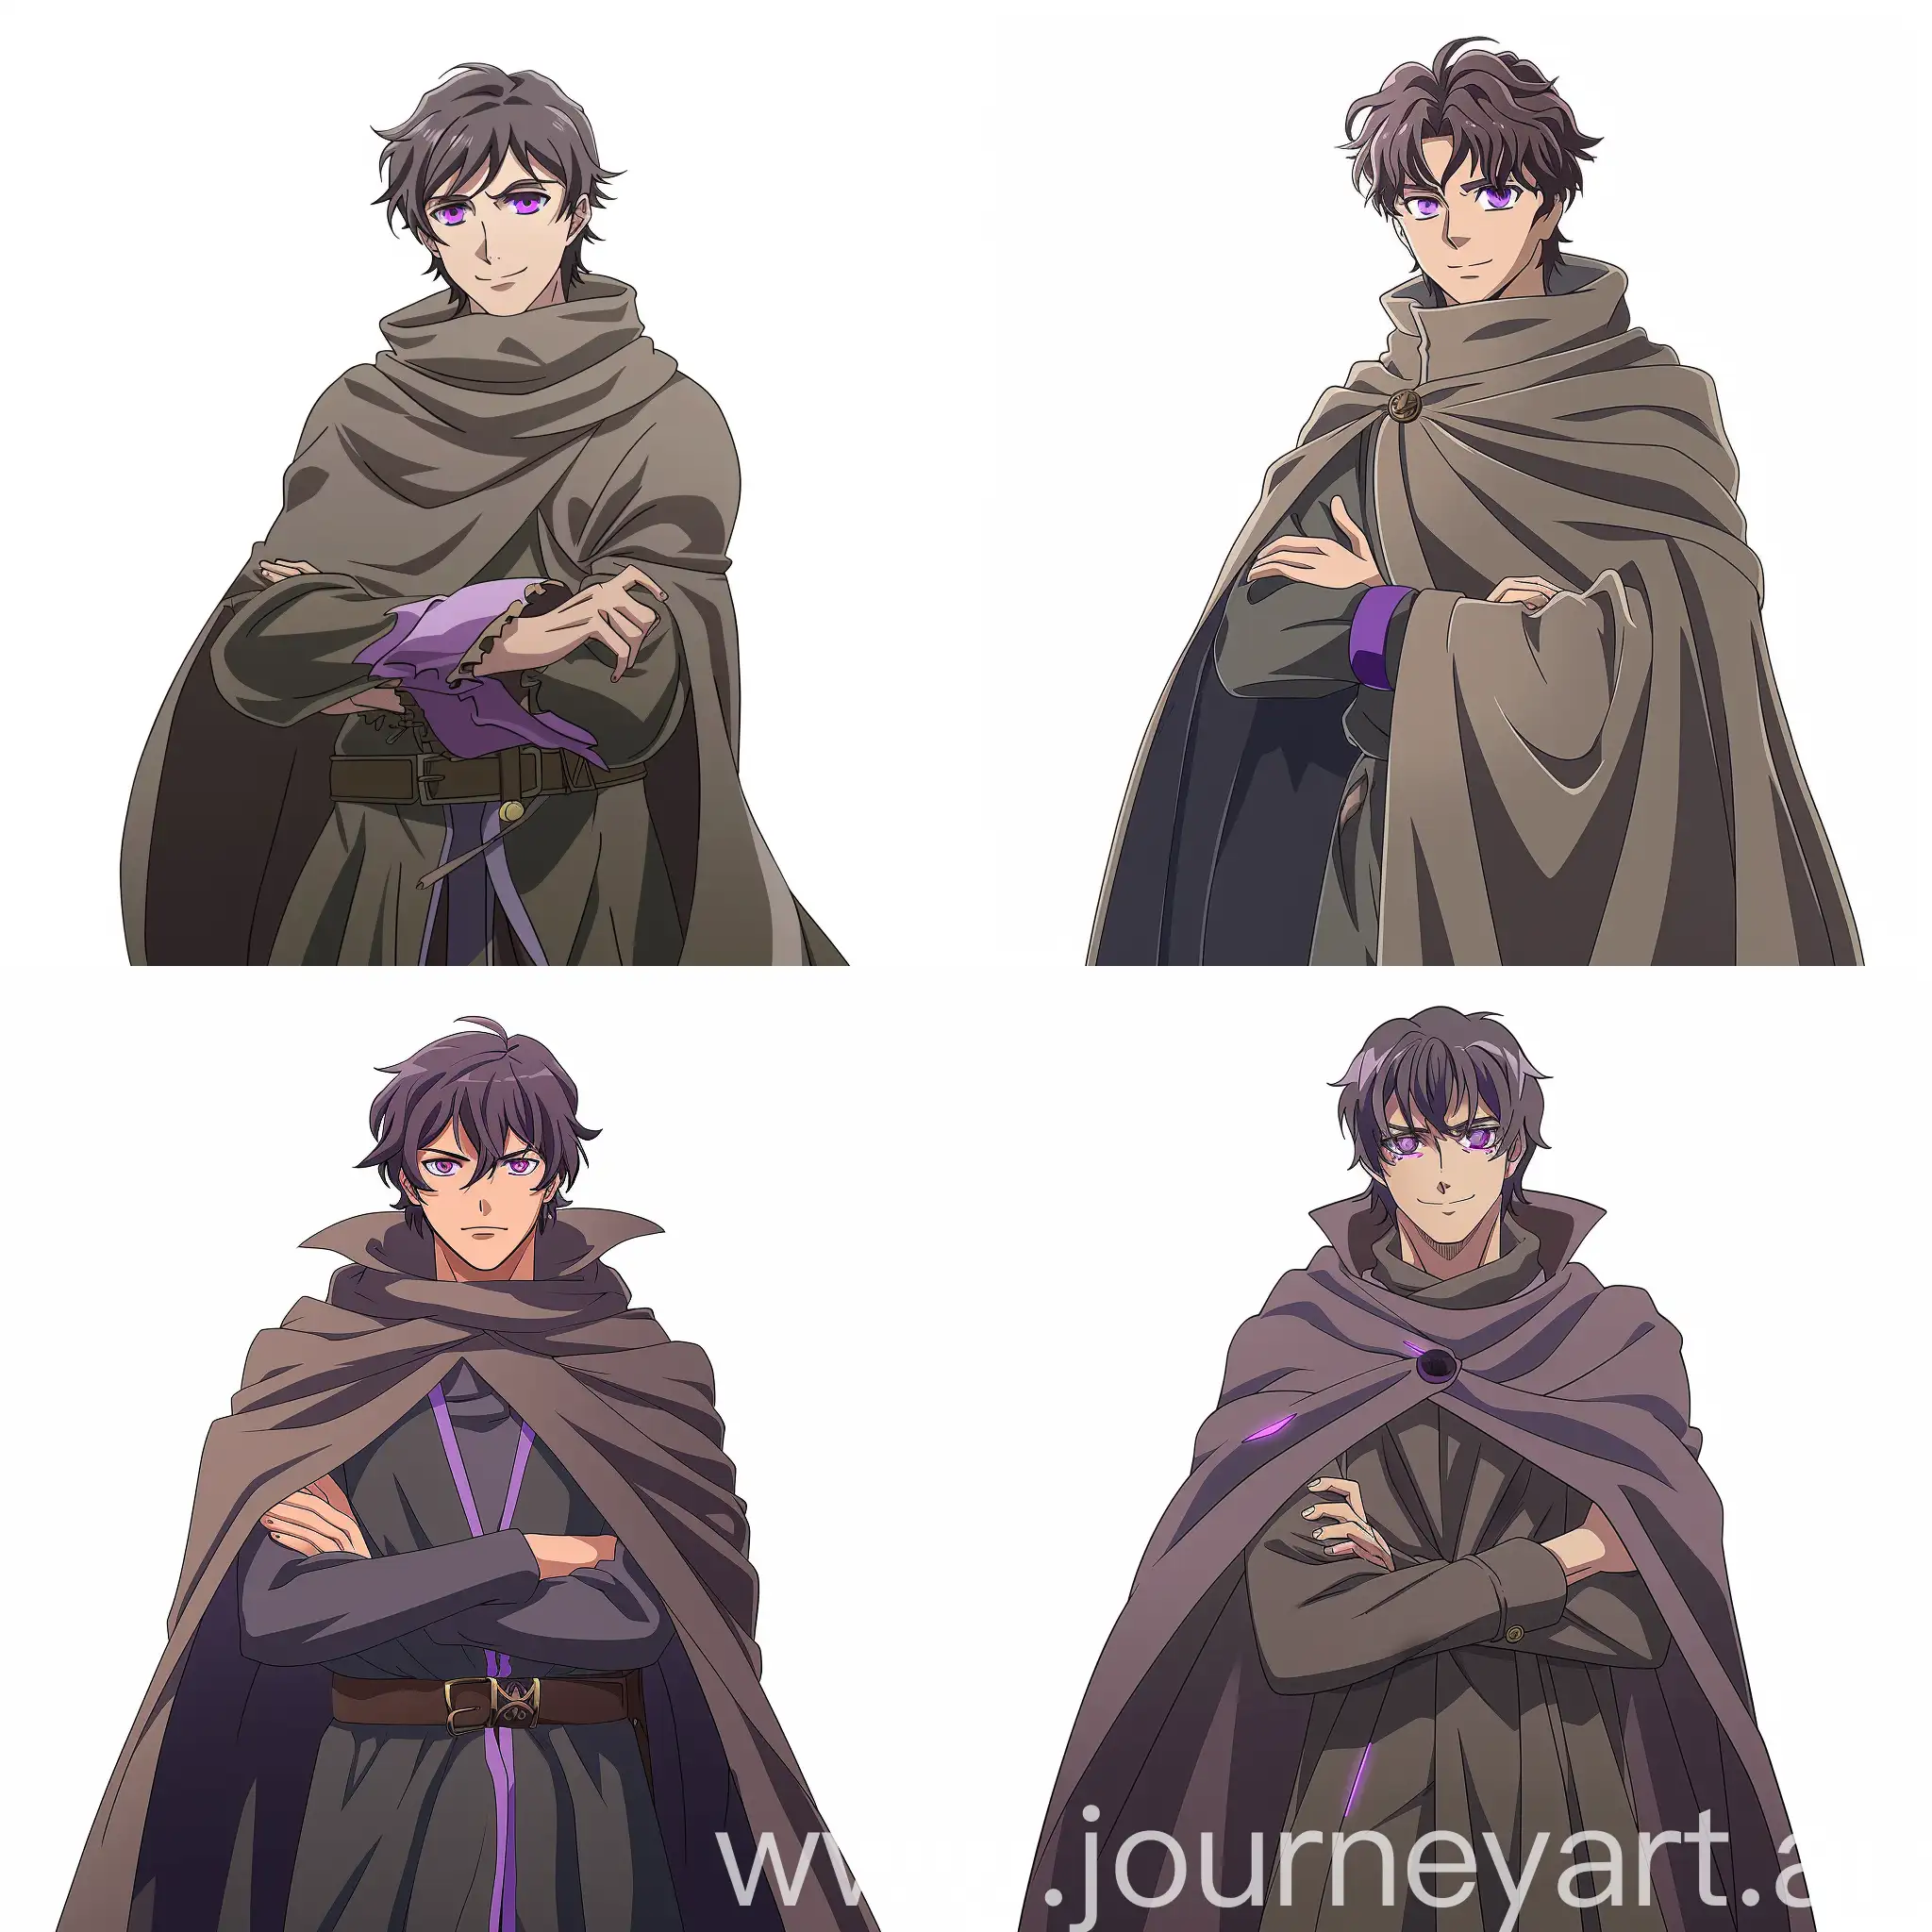 Strong-Anime-Mage-with-Purple-Cloak-in-Magical-Battle-Pose